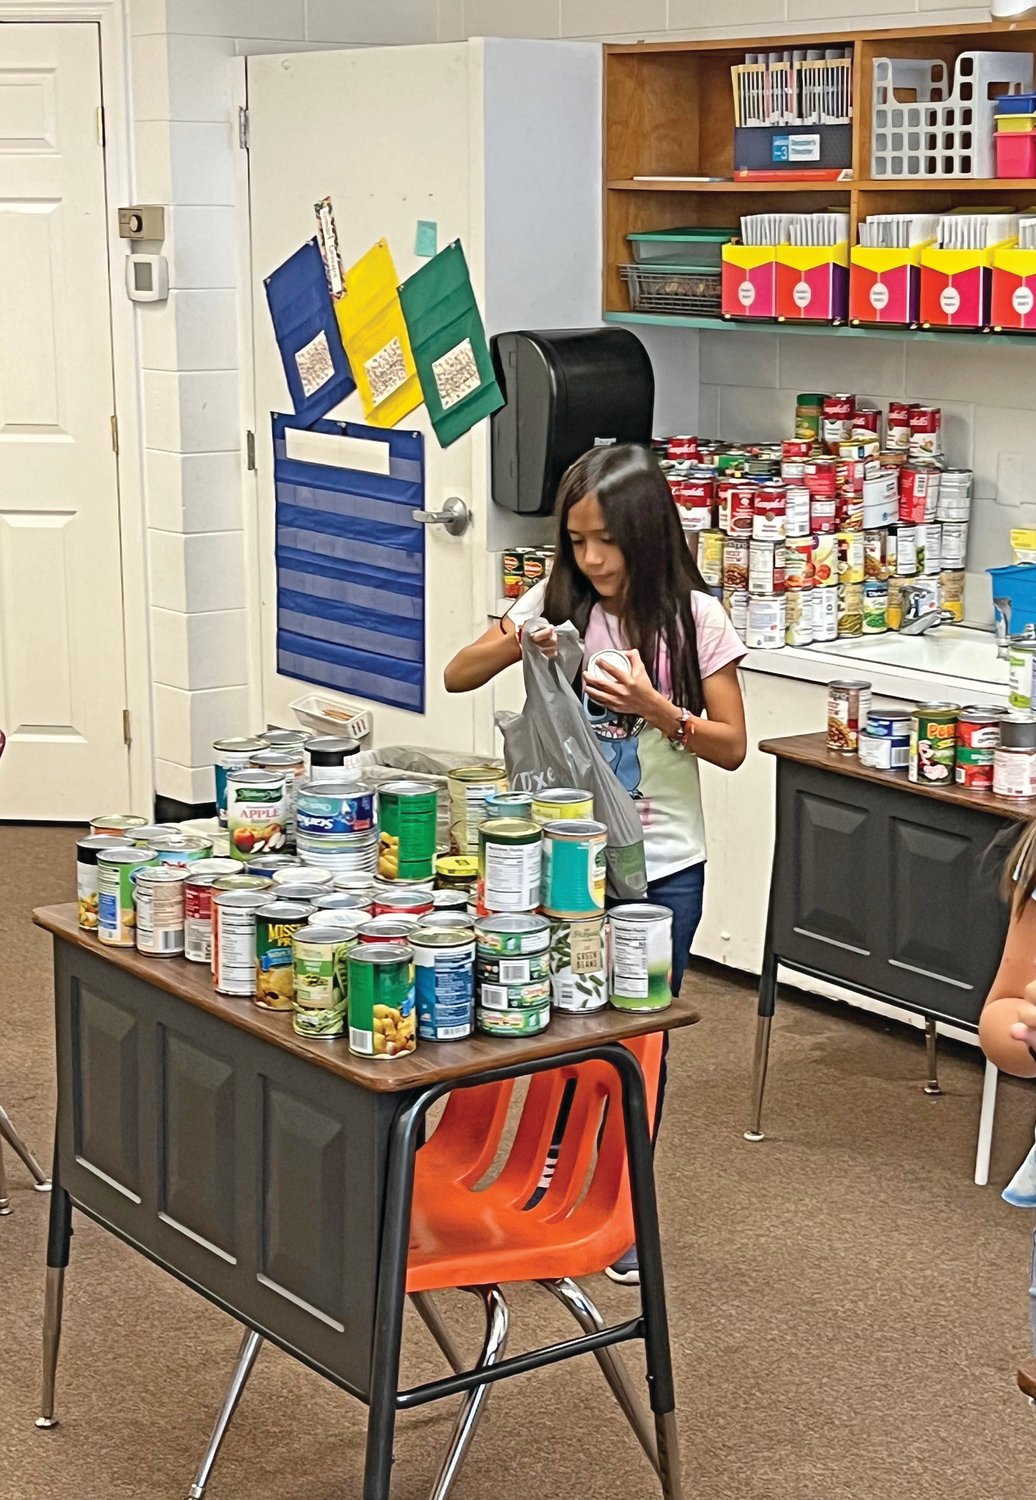 Another photo of a student unpacking canned goods.